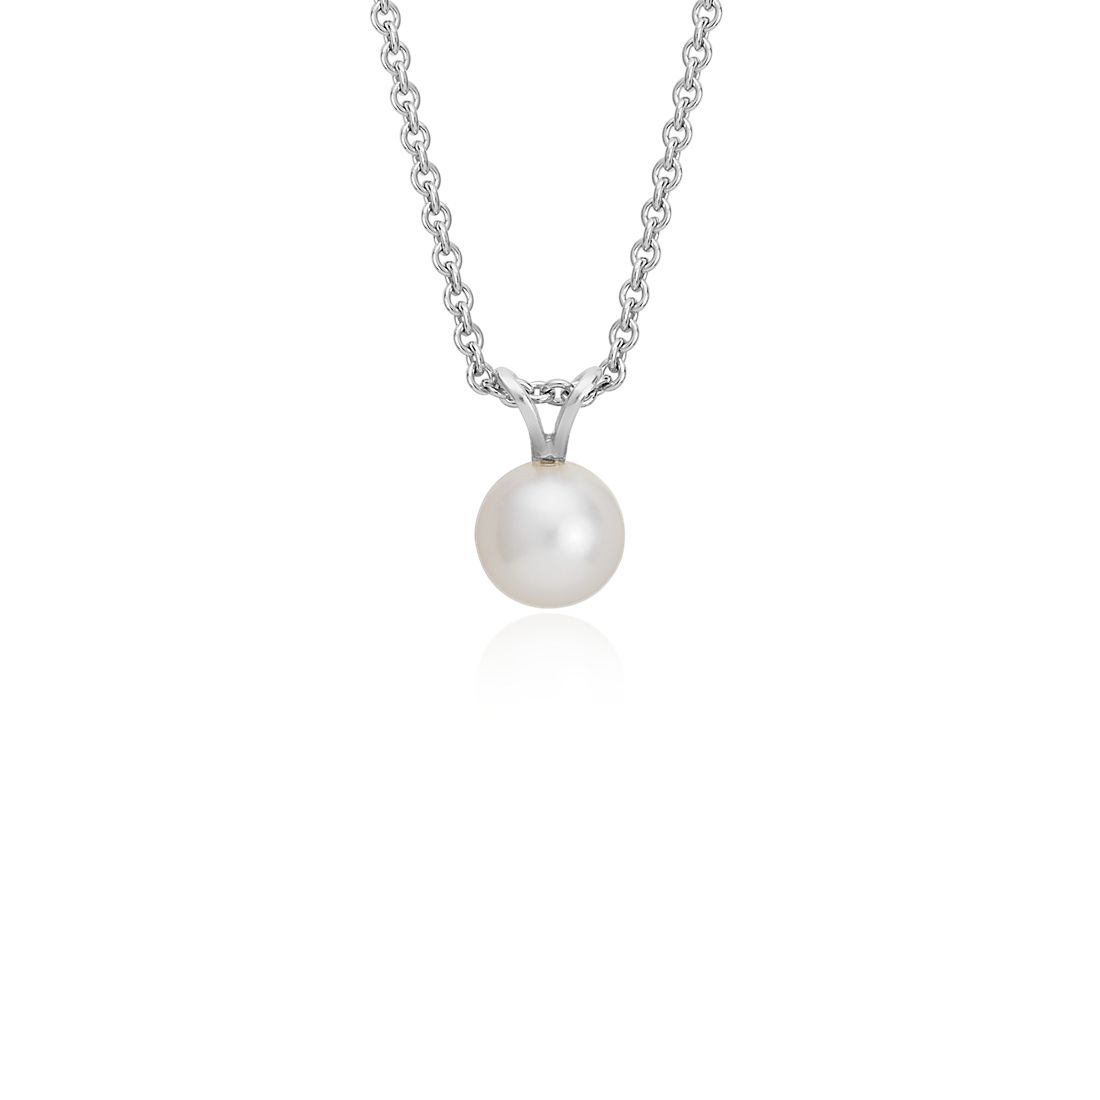 Freshwater Cultured Pearl Pendant with Sterling Silver (7.0-7.5mm)